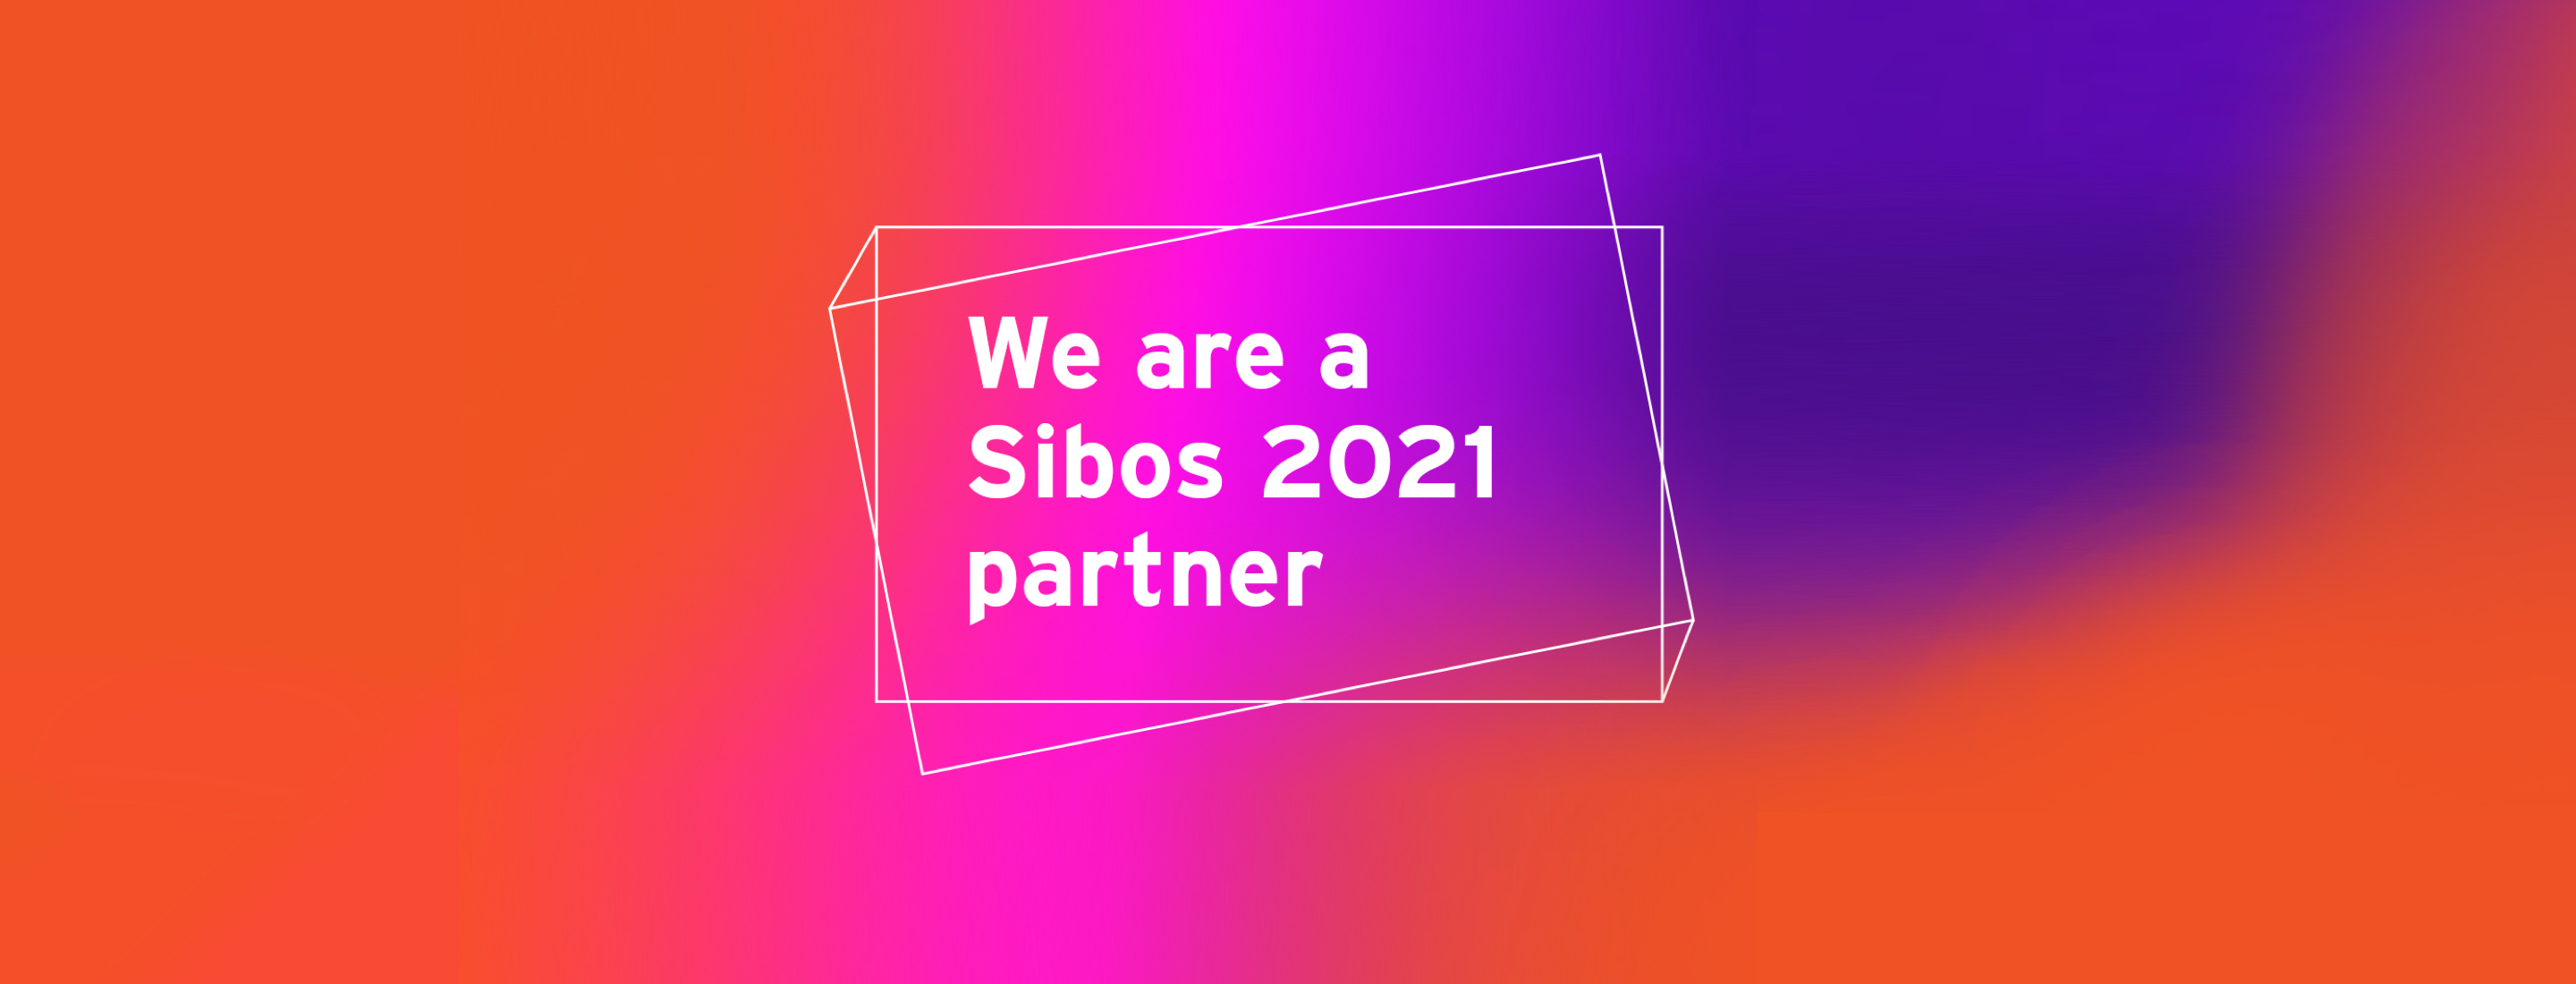 We are a Sibos 2021 partner